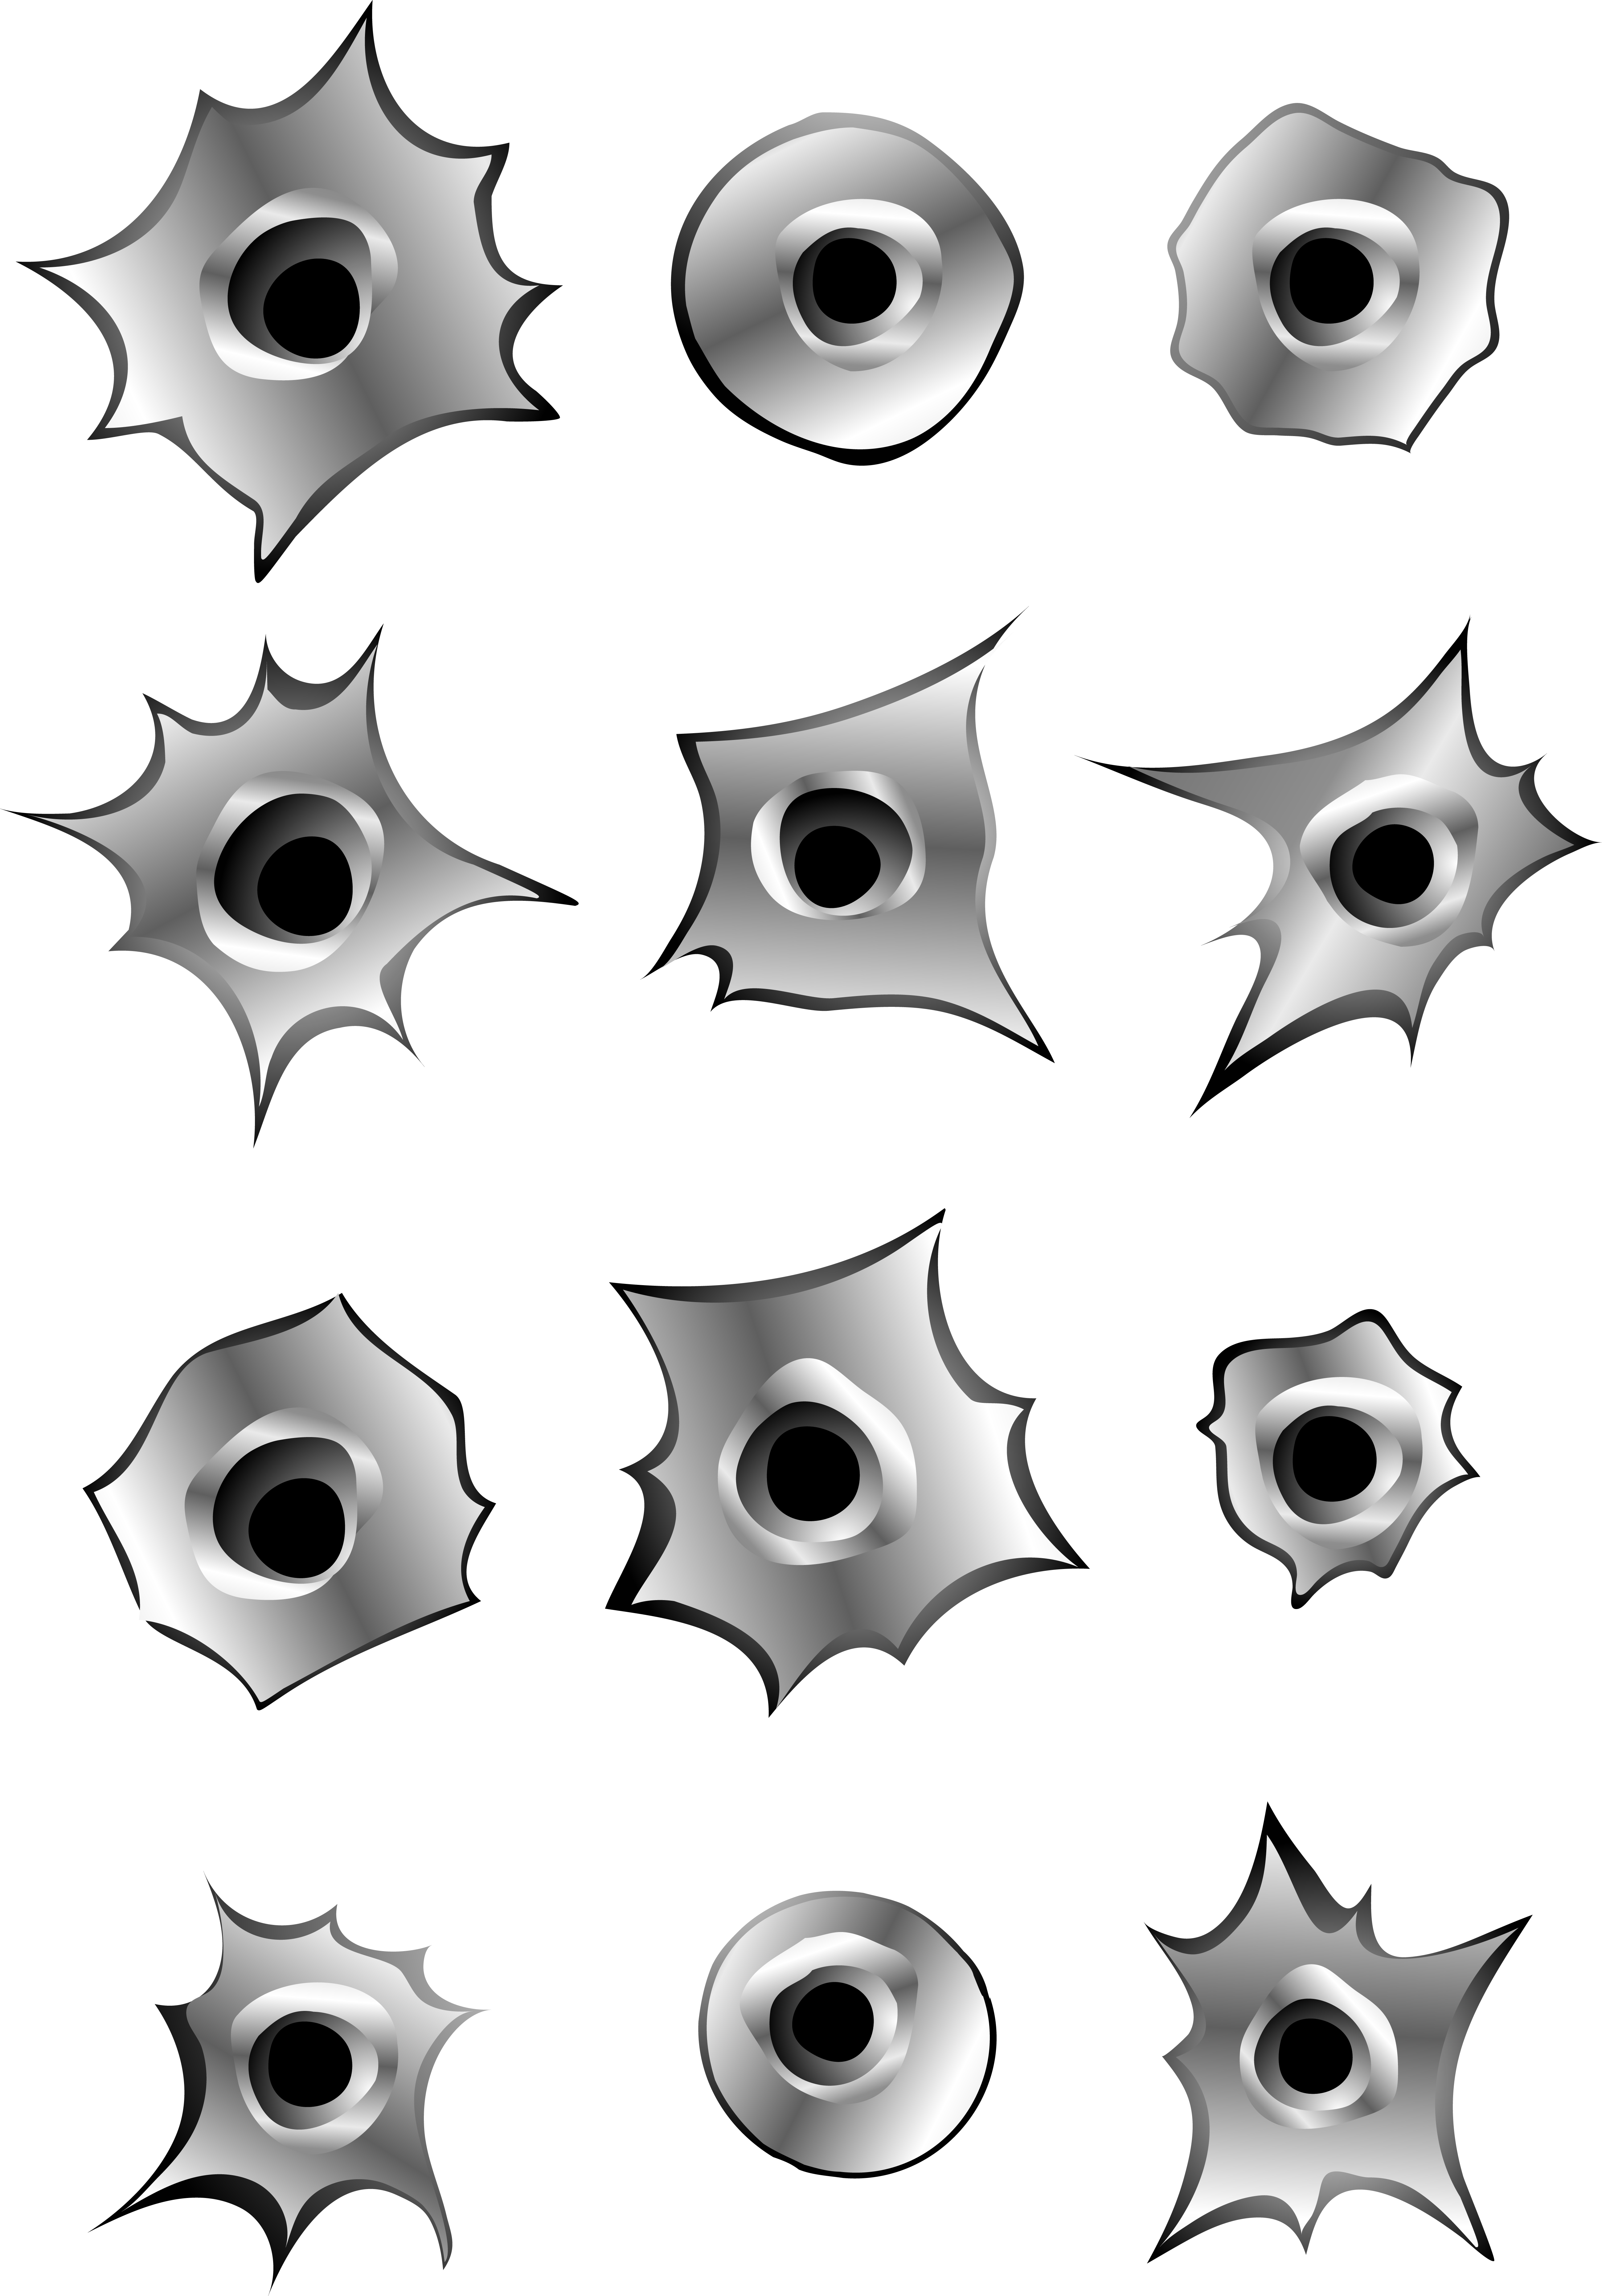 Bullet holes silhouette clipart free.